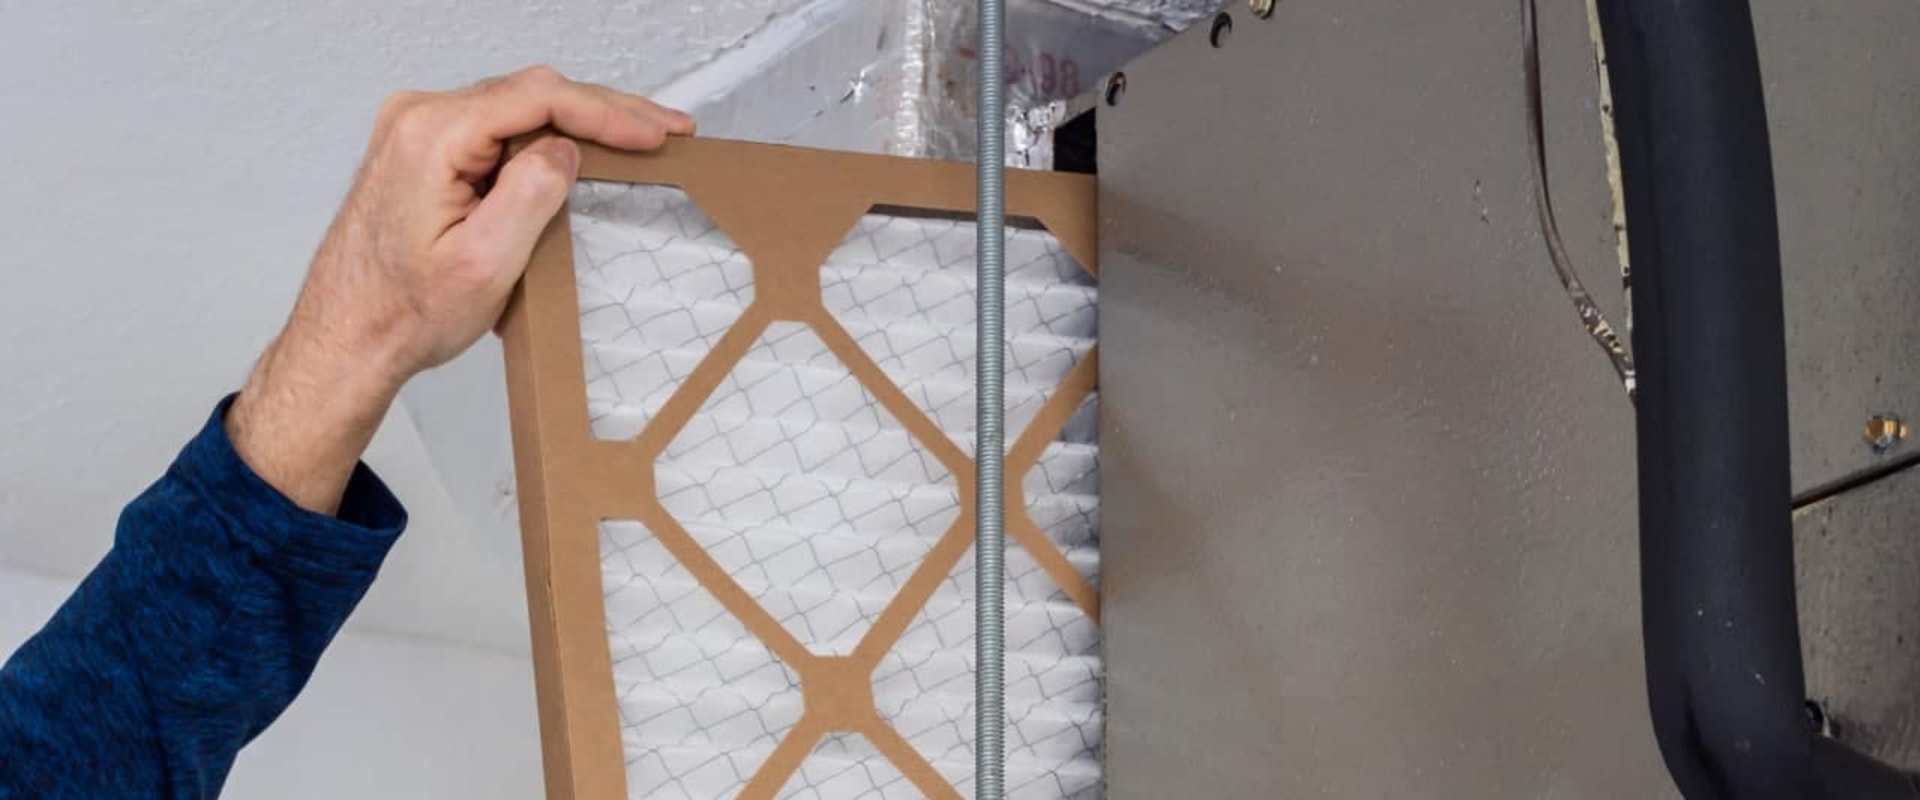 How Long Does an HVAC Filter Last? A Comprehensive Guide